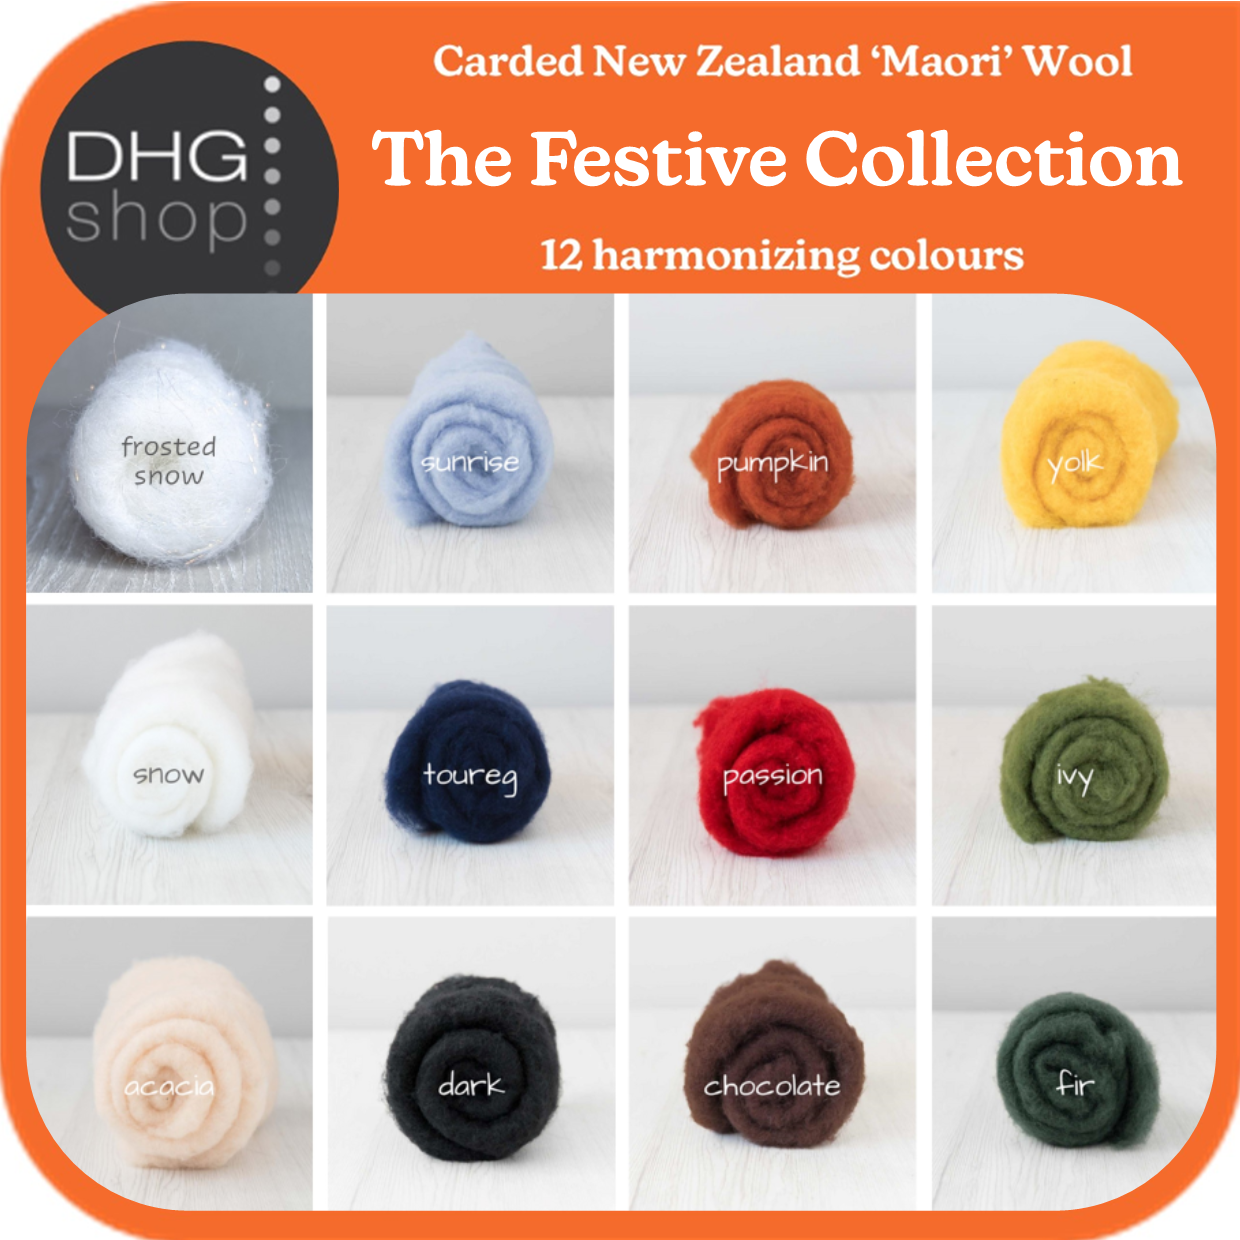 The Festive Collection - Carded New Zealand Wool DHG 'Maori' Batts